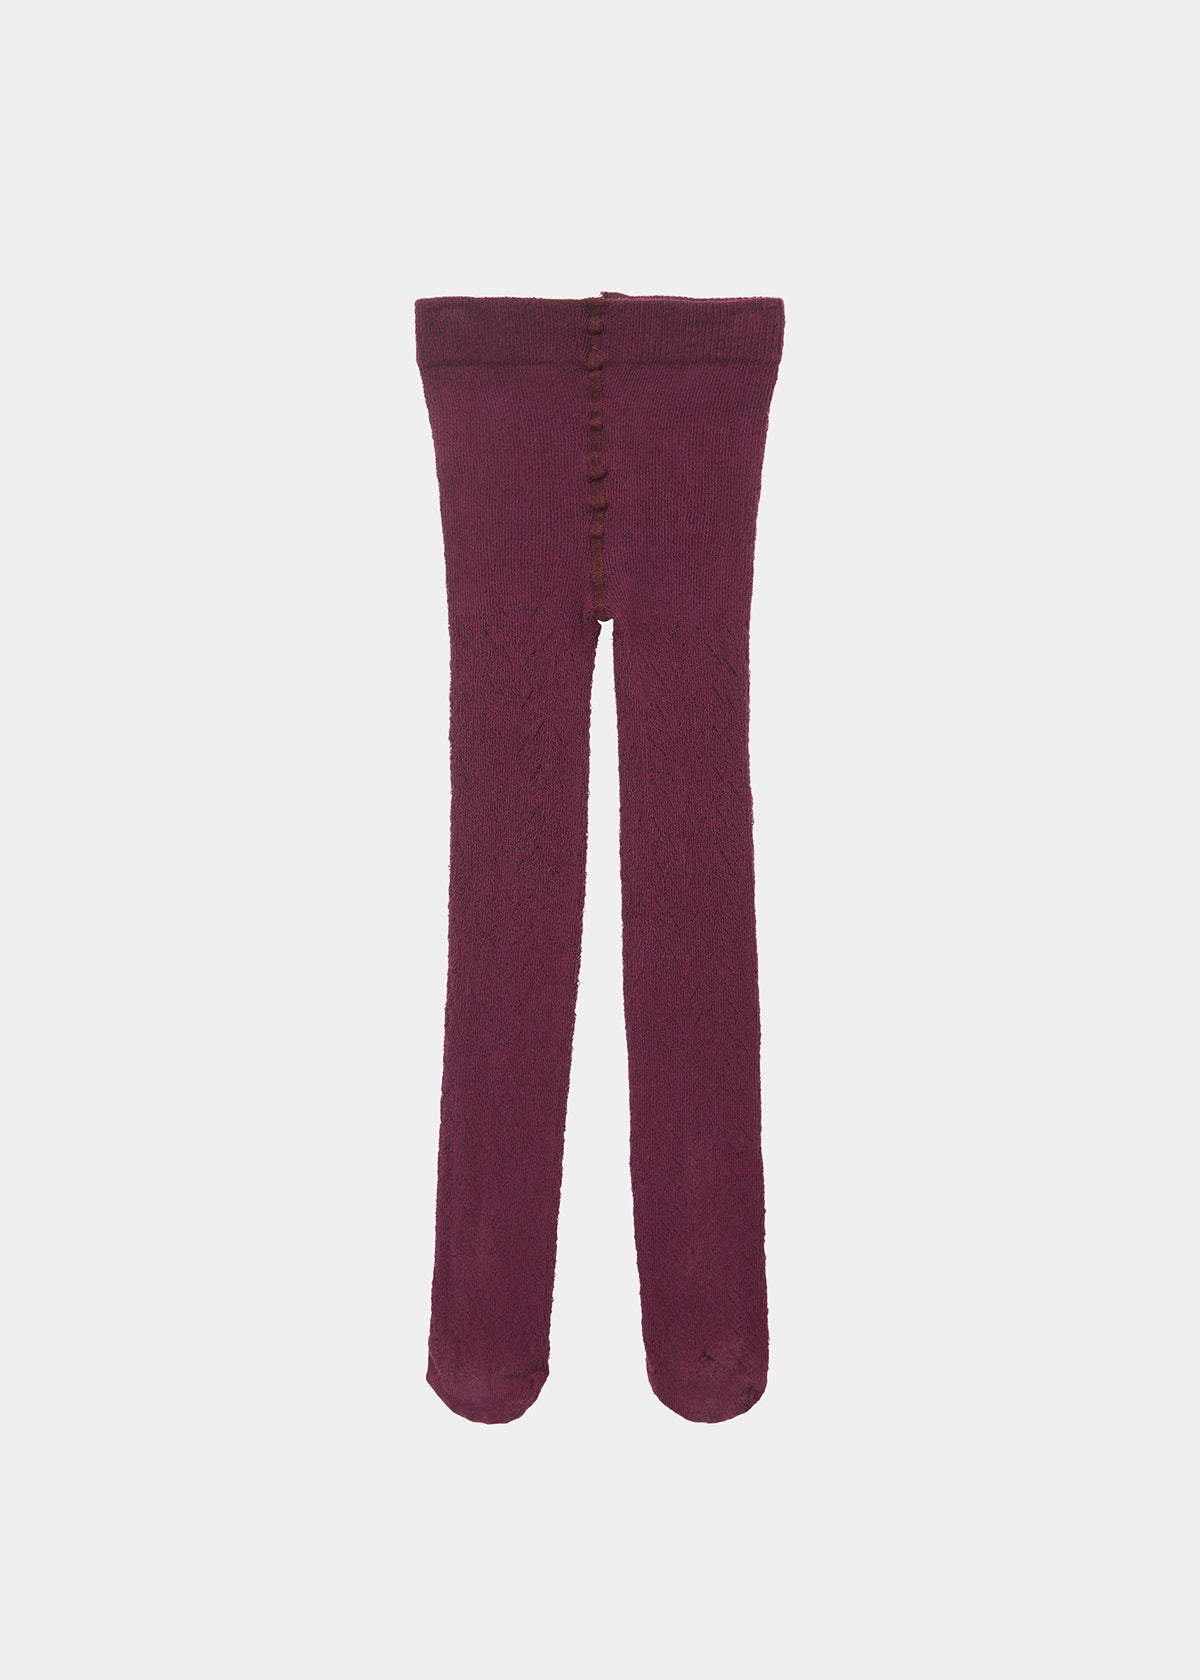 POINTELLE TIGHTS - PLUM (FRONT)